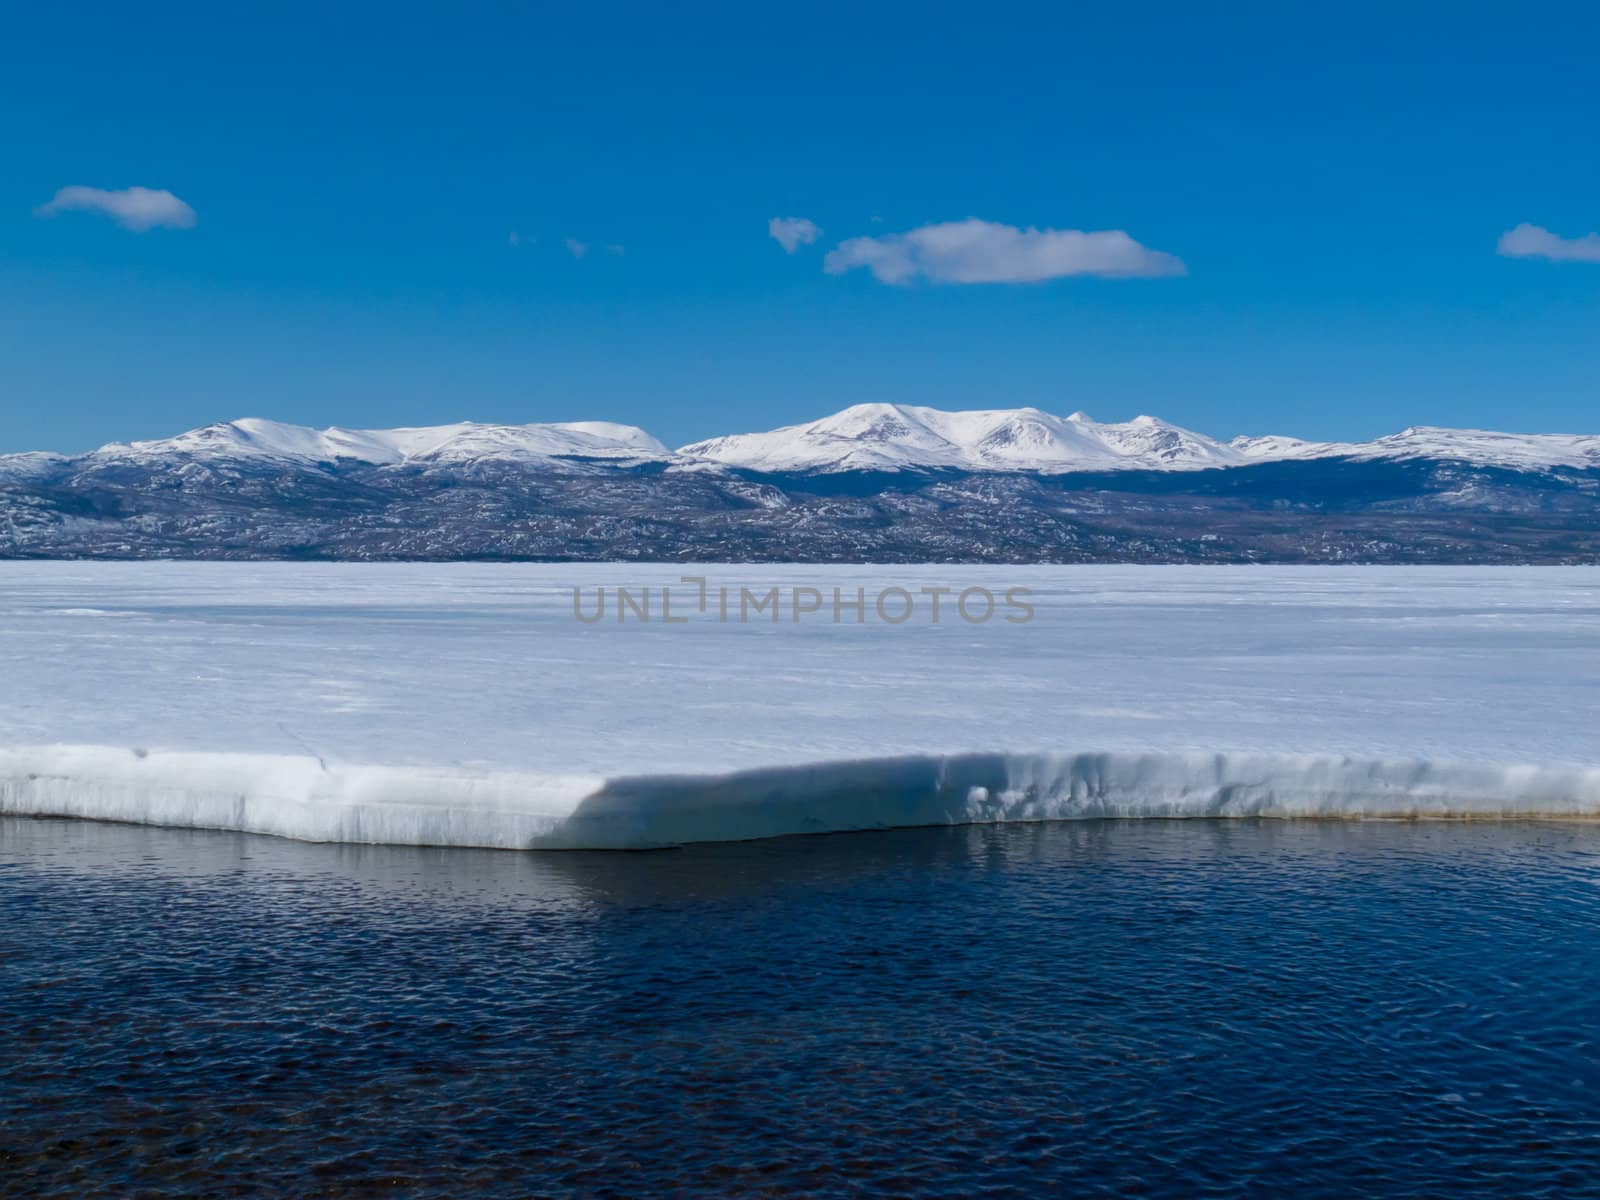 First open water at thawing Lake Laberge, Yukon Territory, Canada, and snow-covered mountains at distant shore of ice-covered frozen lake.